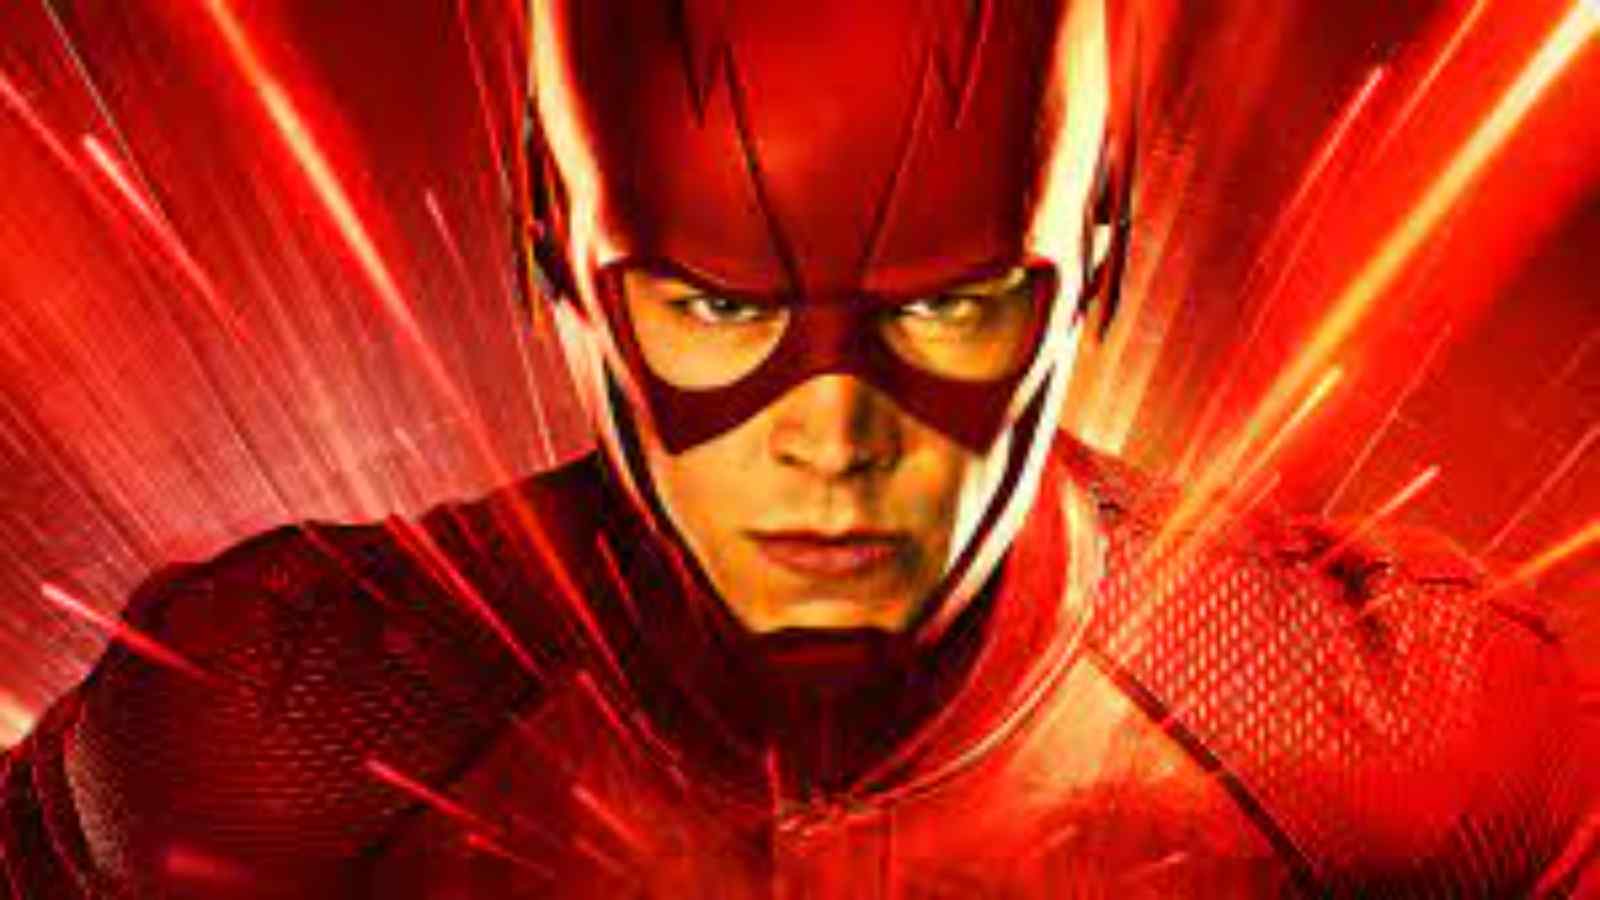 The Flash: All We Know About The DC Comics Film, cast and crew